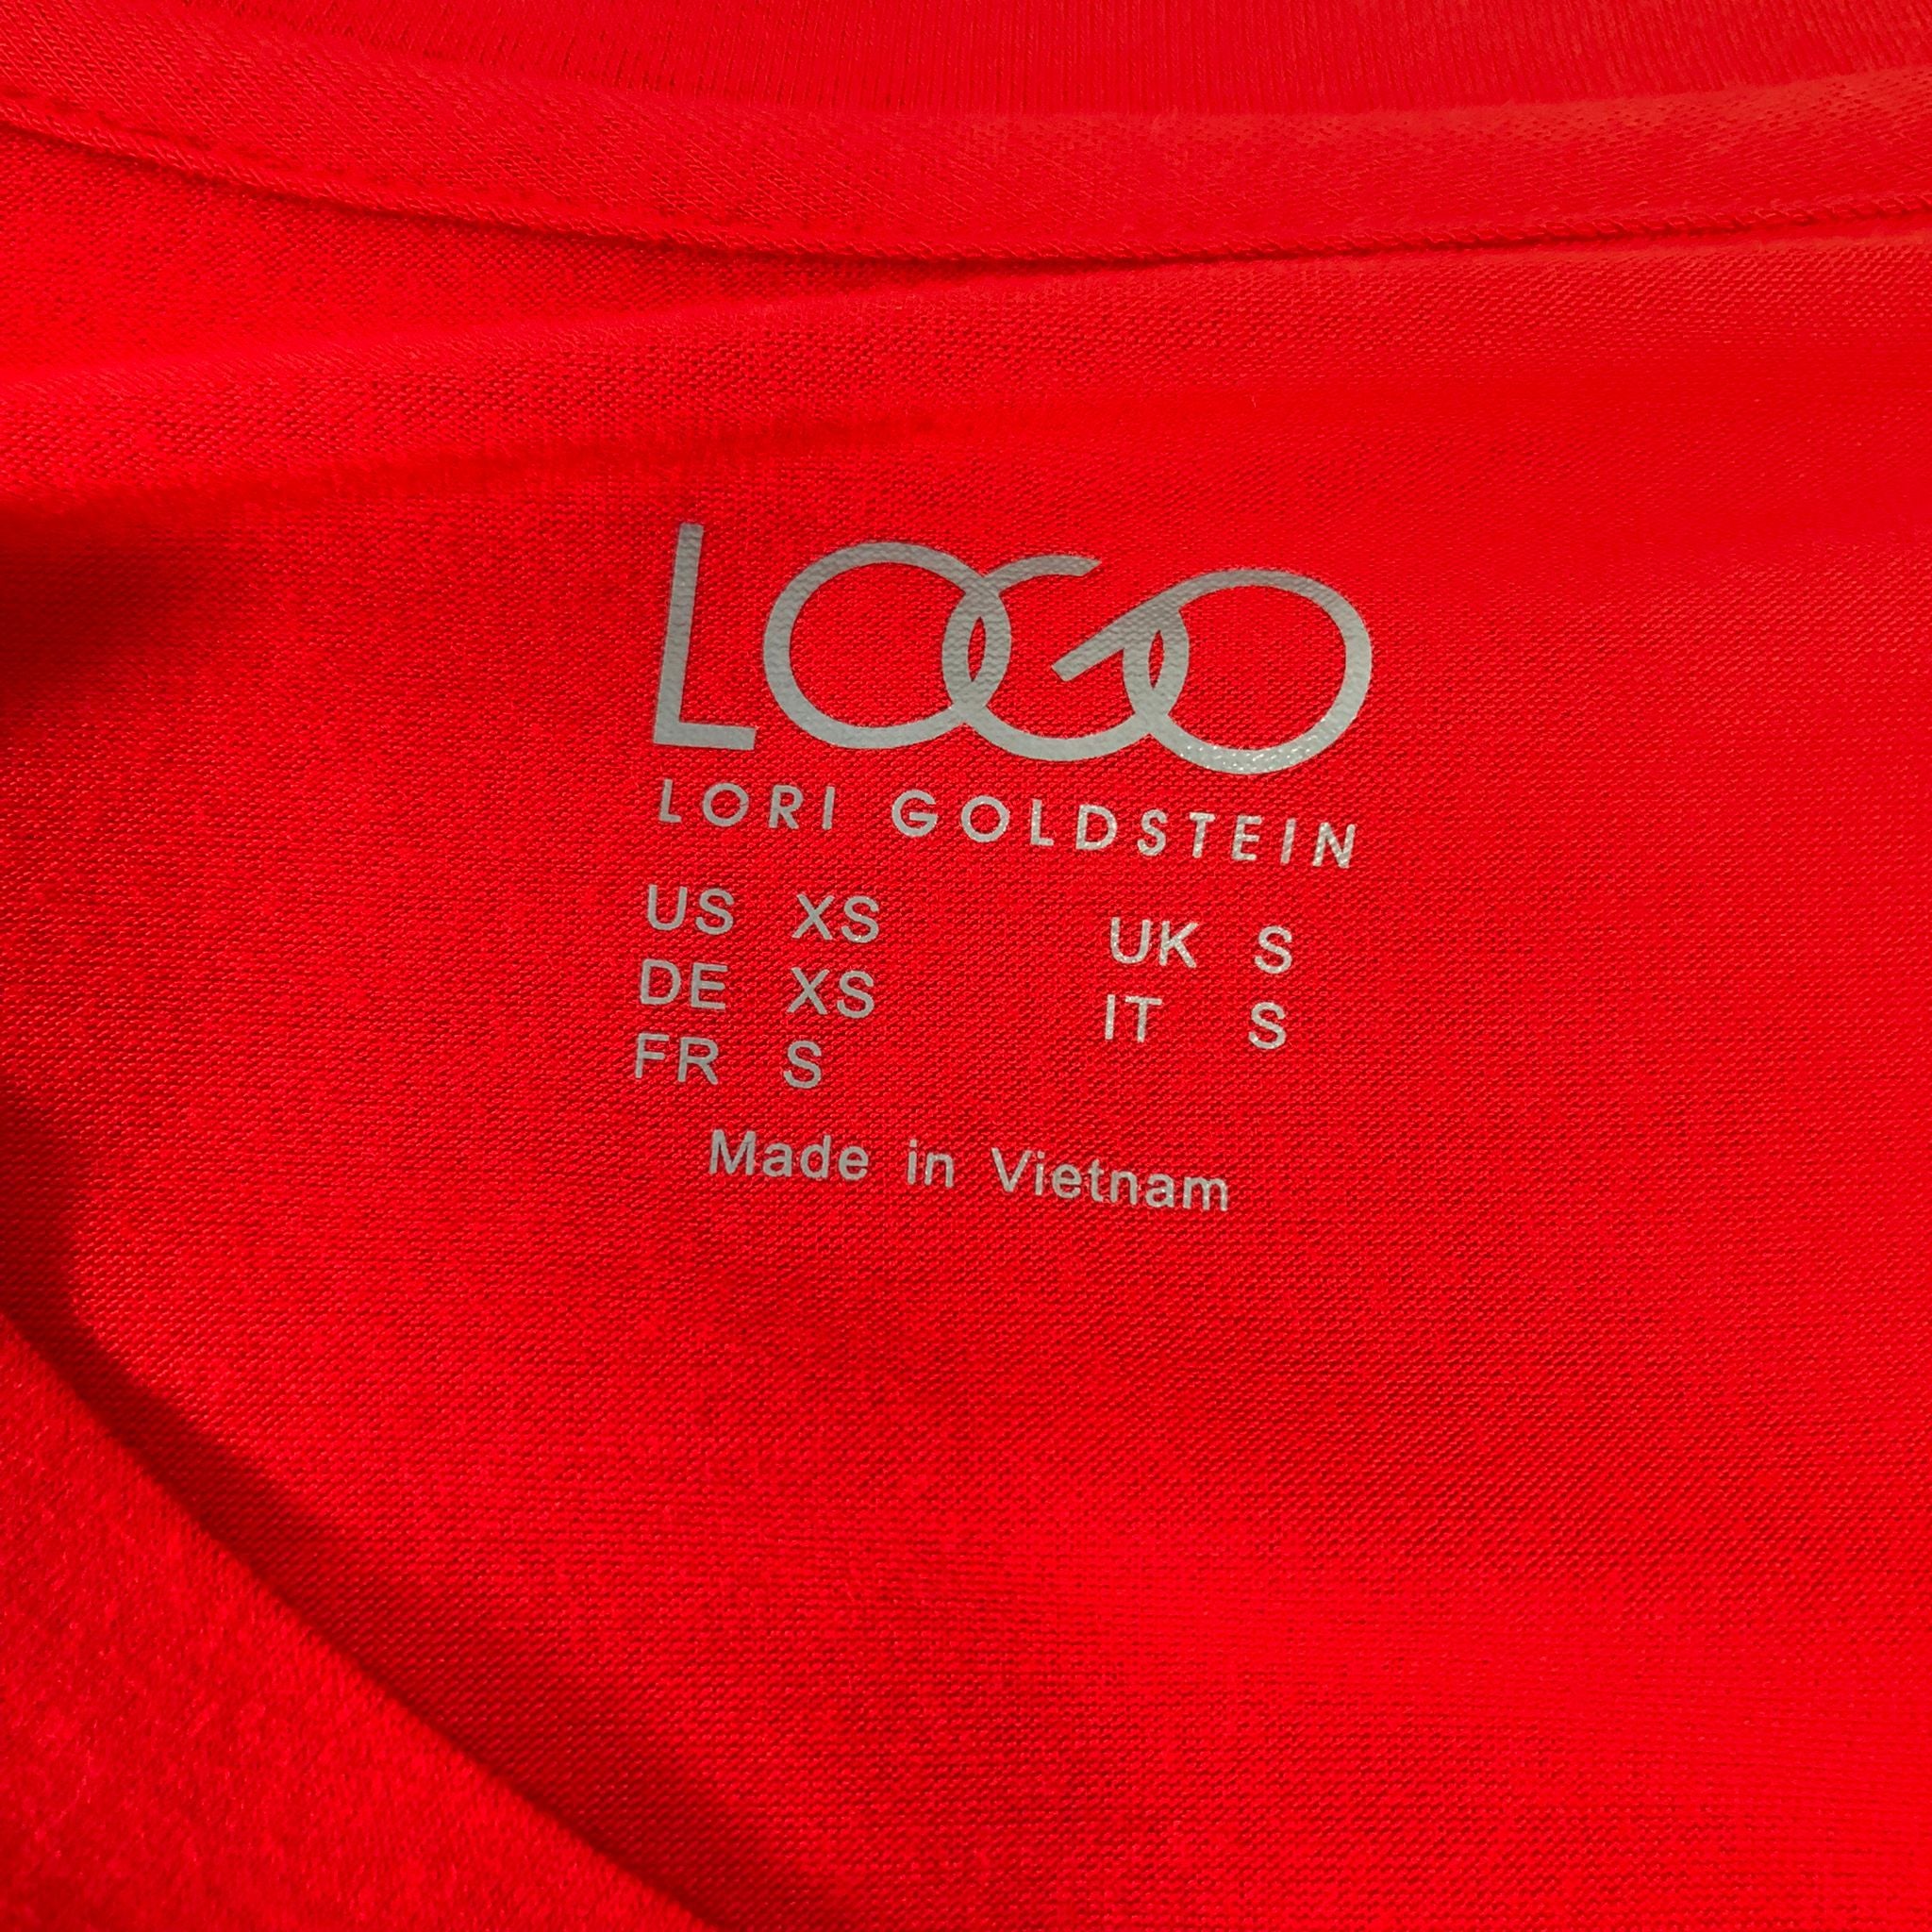 LOGO by Lori Goldstein V-neck Tee with 3/4 Sleeves and Pocket Detail